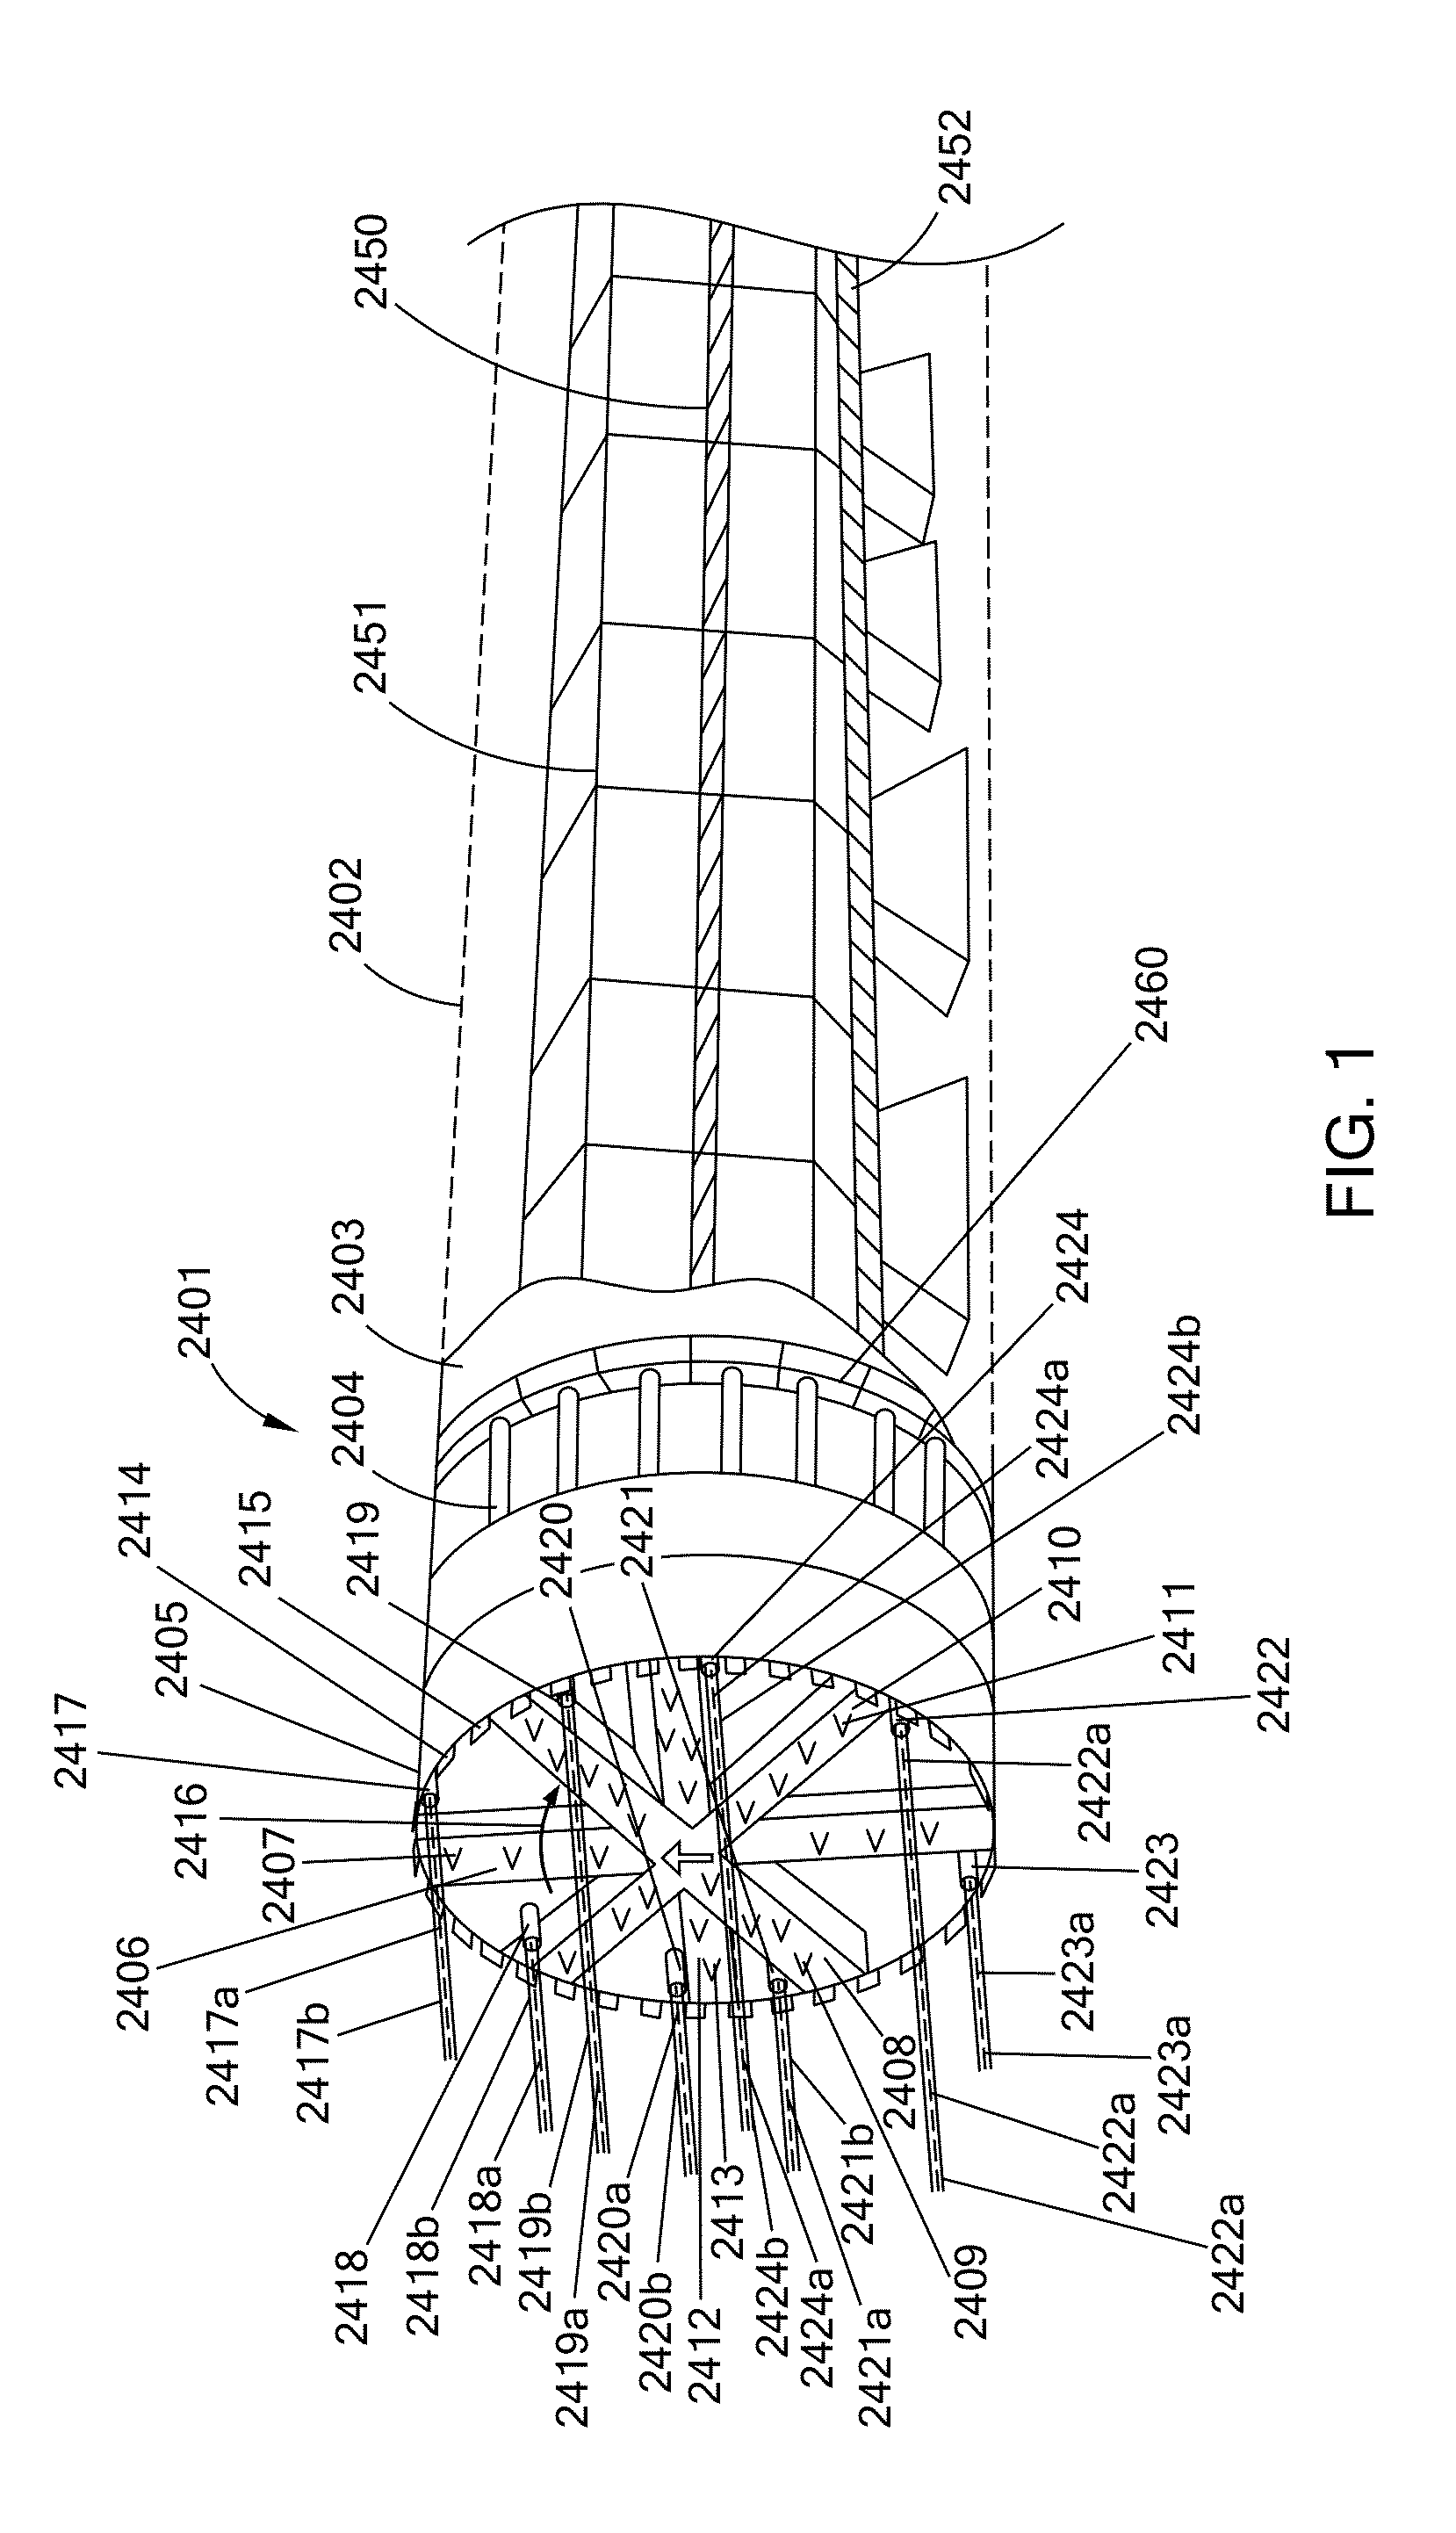 High power laser tunneling mining and construction equipment and methods of use